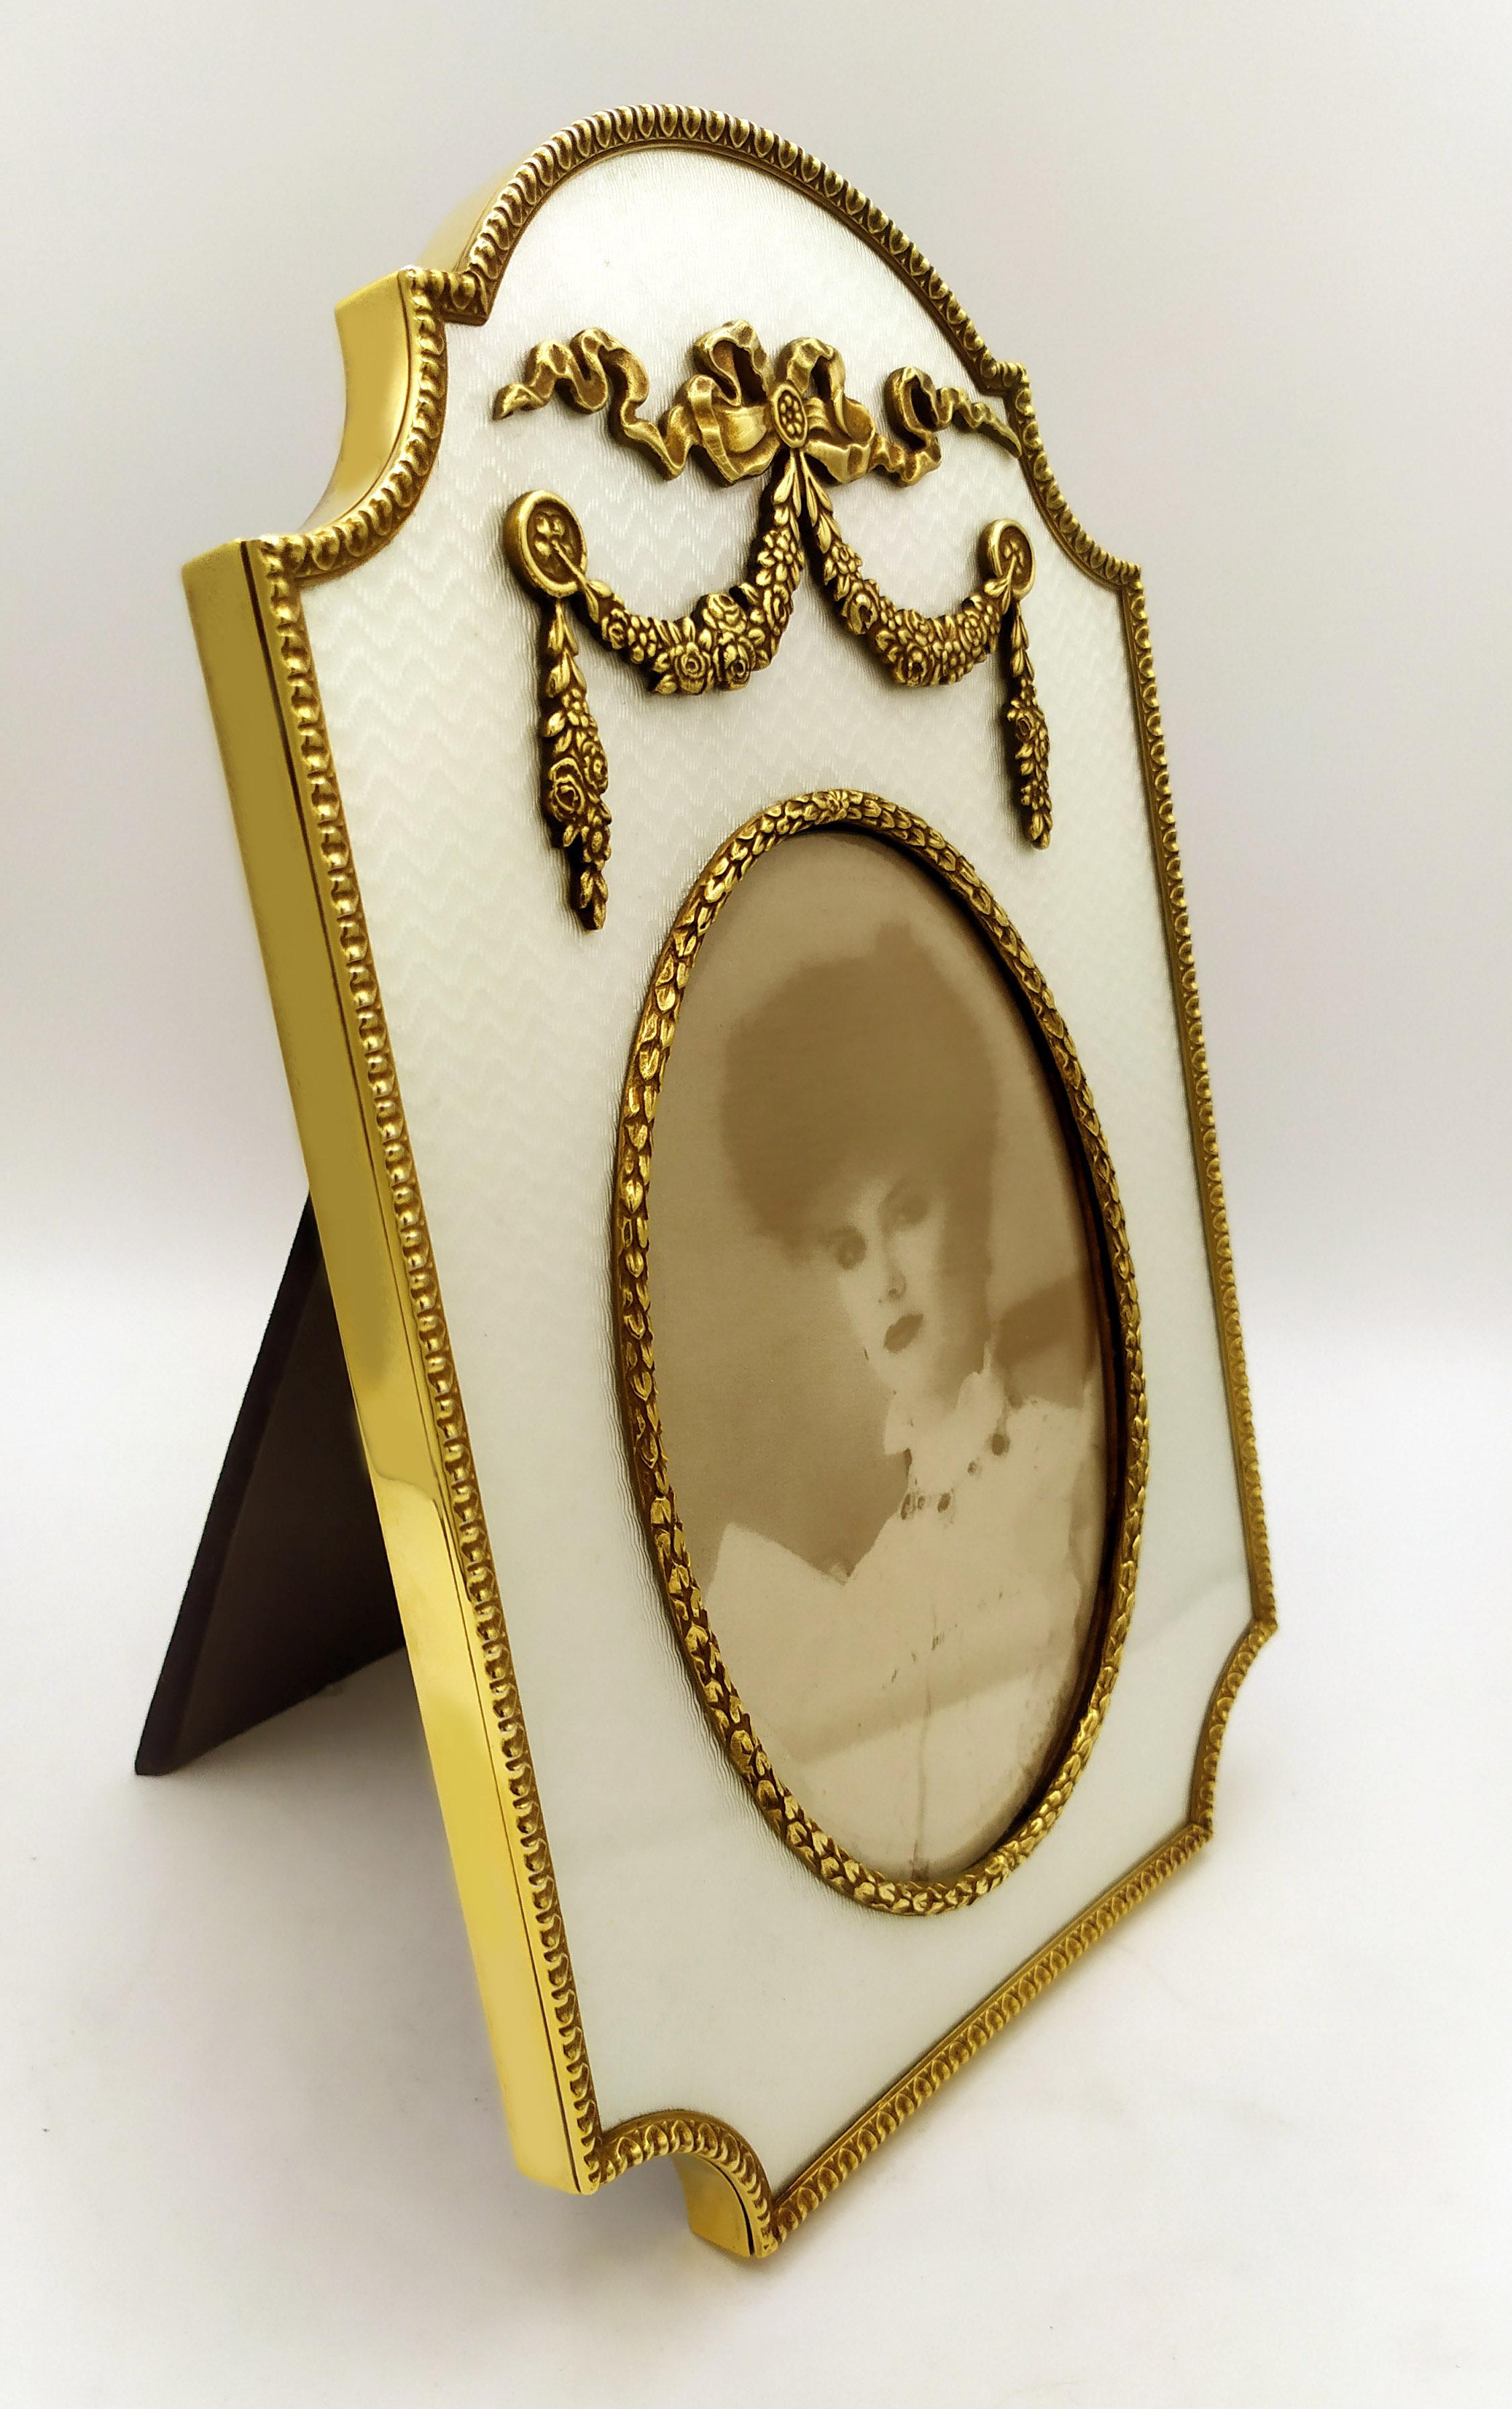 Large gold-plated 925/1000 sterling silver shaped photograph frame with translucent fired enamel on guillochè and rich friezes in Louis XVI French Empire style. External measurements cm. 18 x 27, internal oval cm. 11 x 15. Silver weight gr. 678.